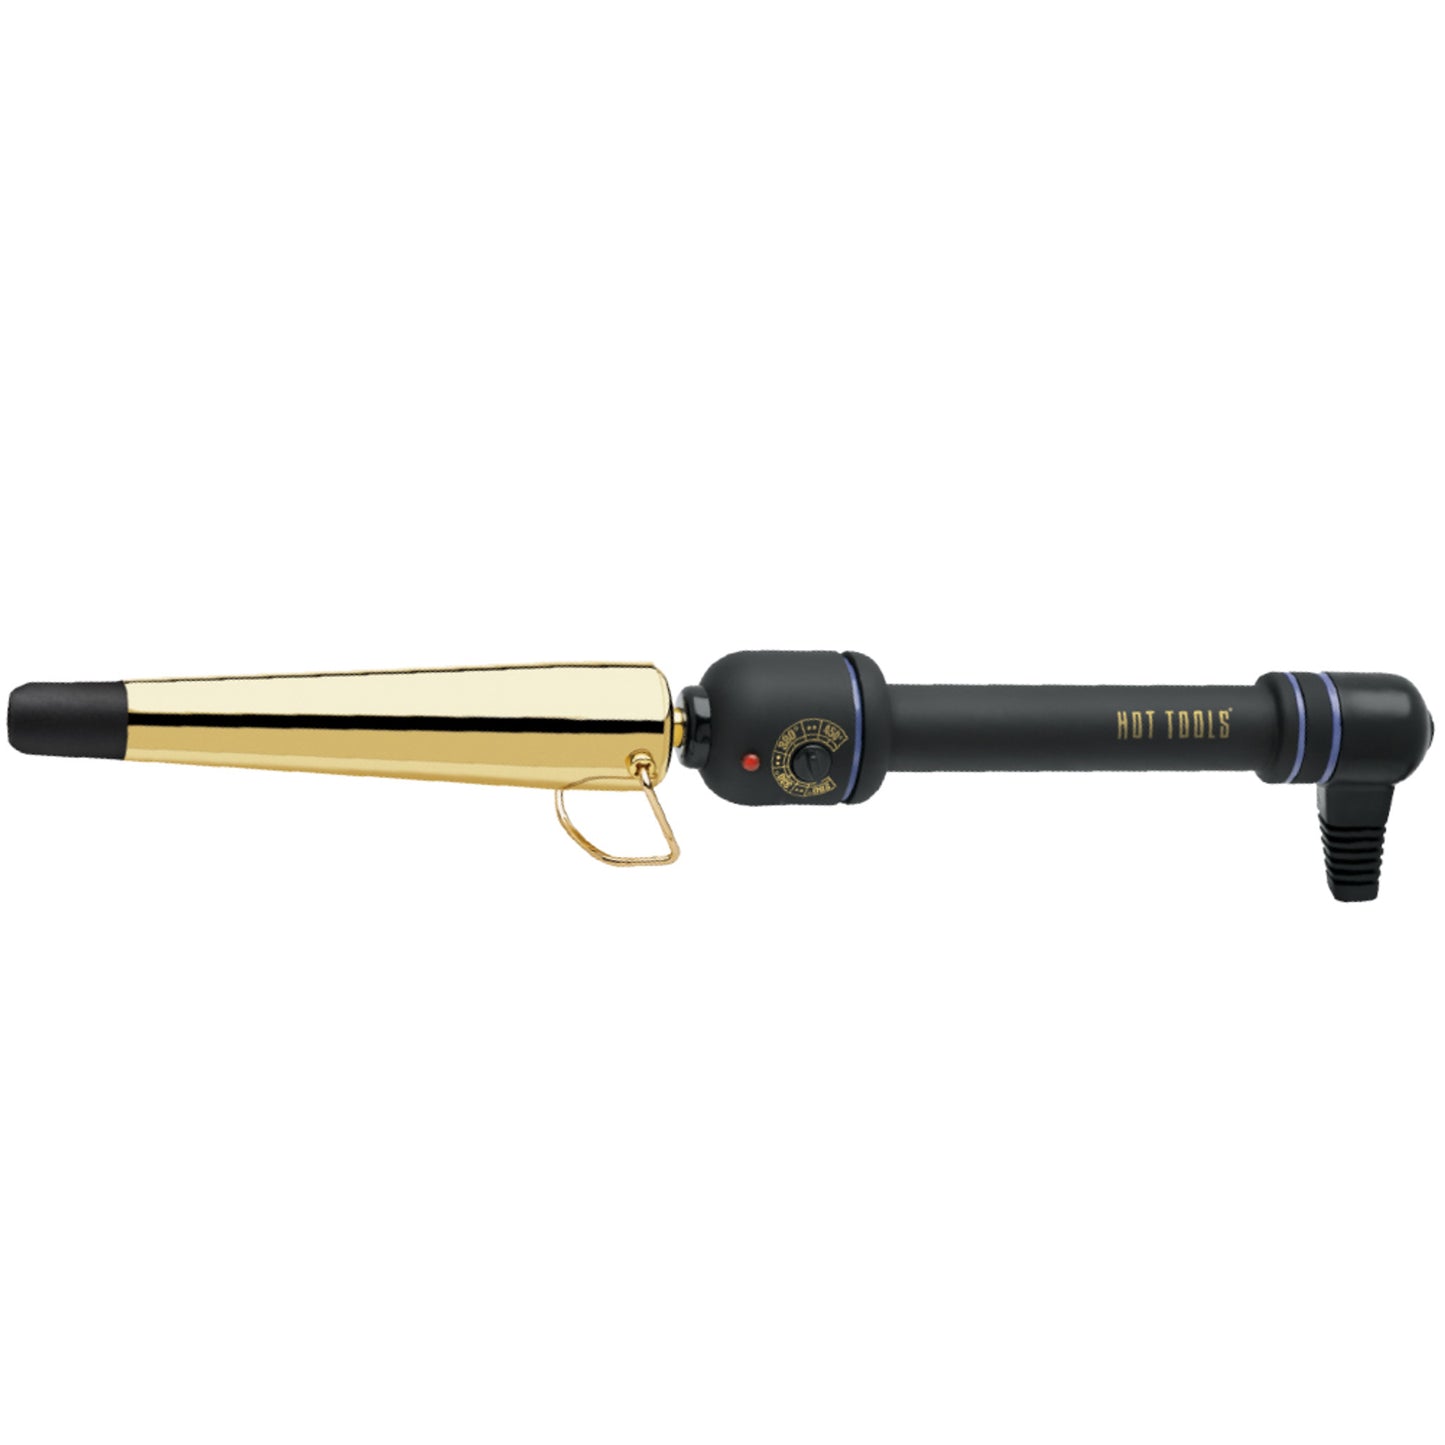 Hot Tools Professional 24k Gold Tapered Curling Iron - 3/4" to 1 1/4"